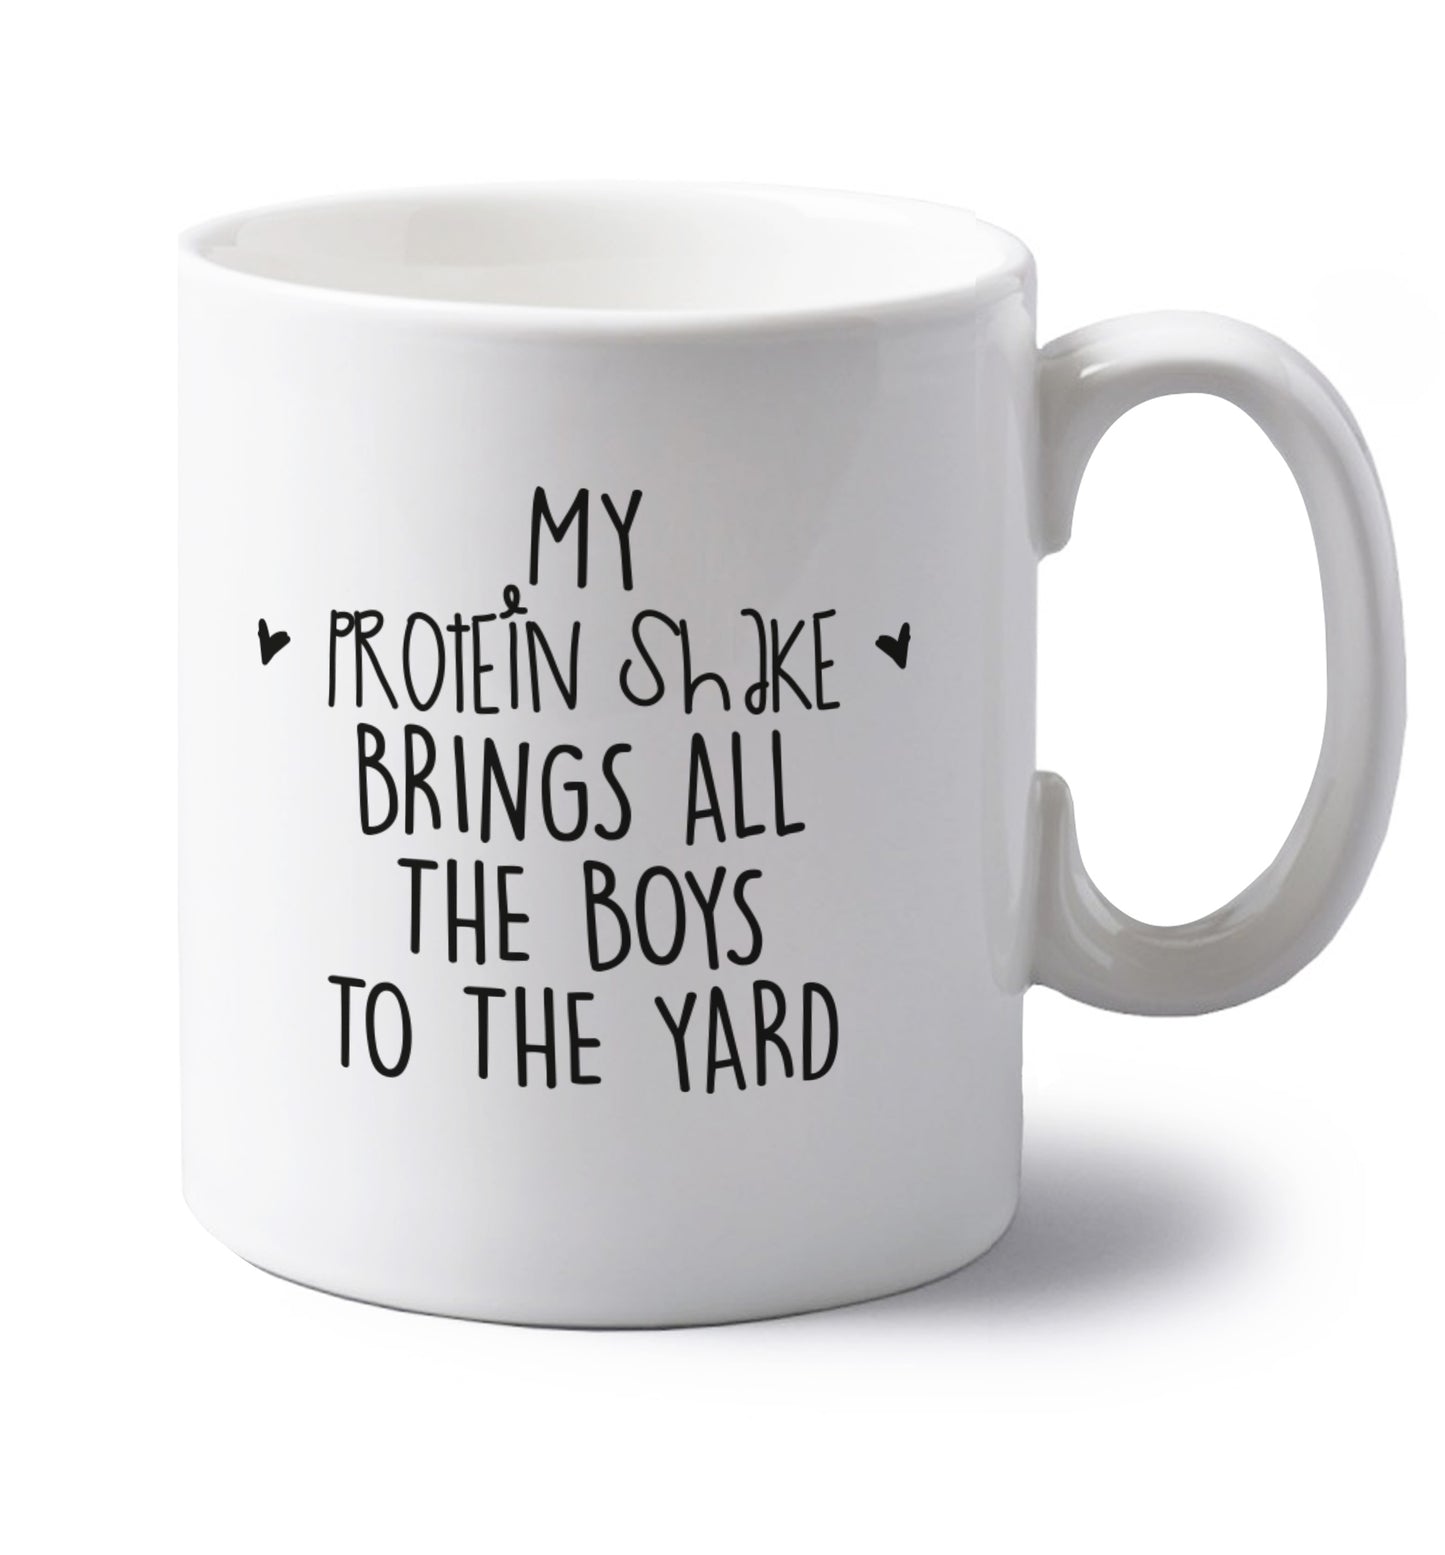 My protein shake brings all the boys to the yard left handed white ceramic mug 